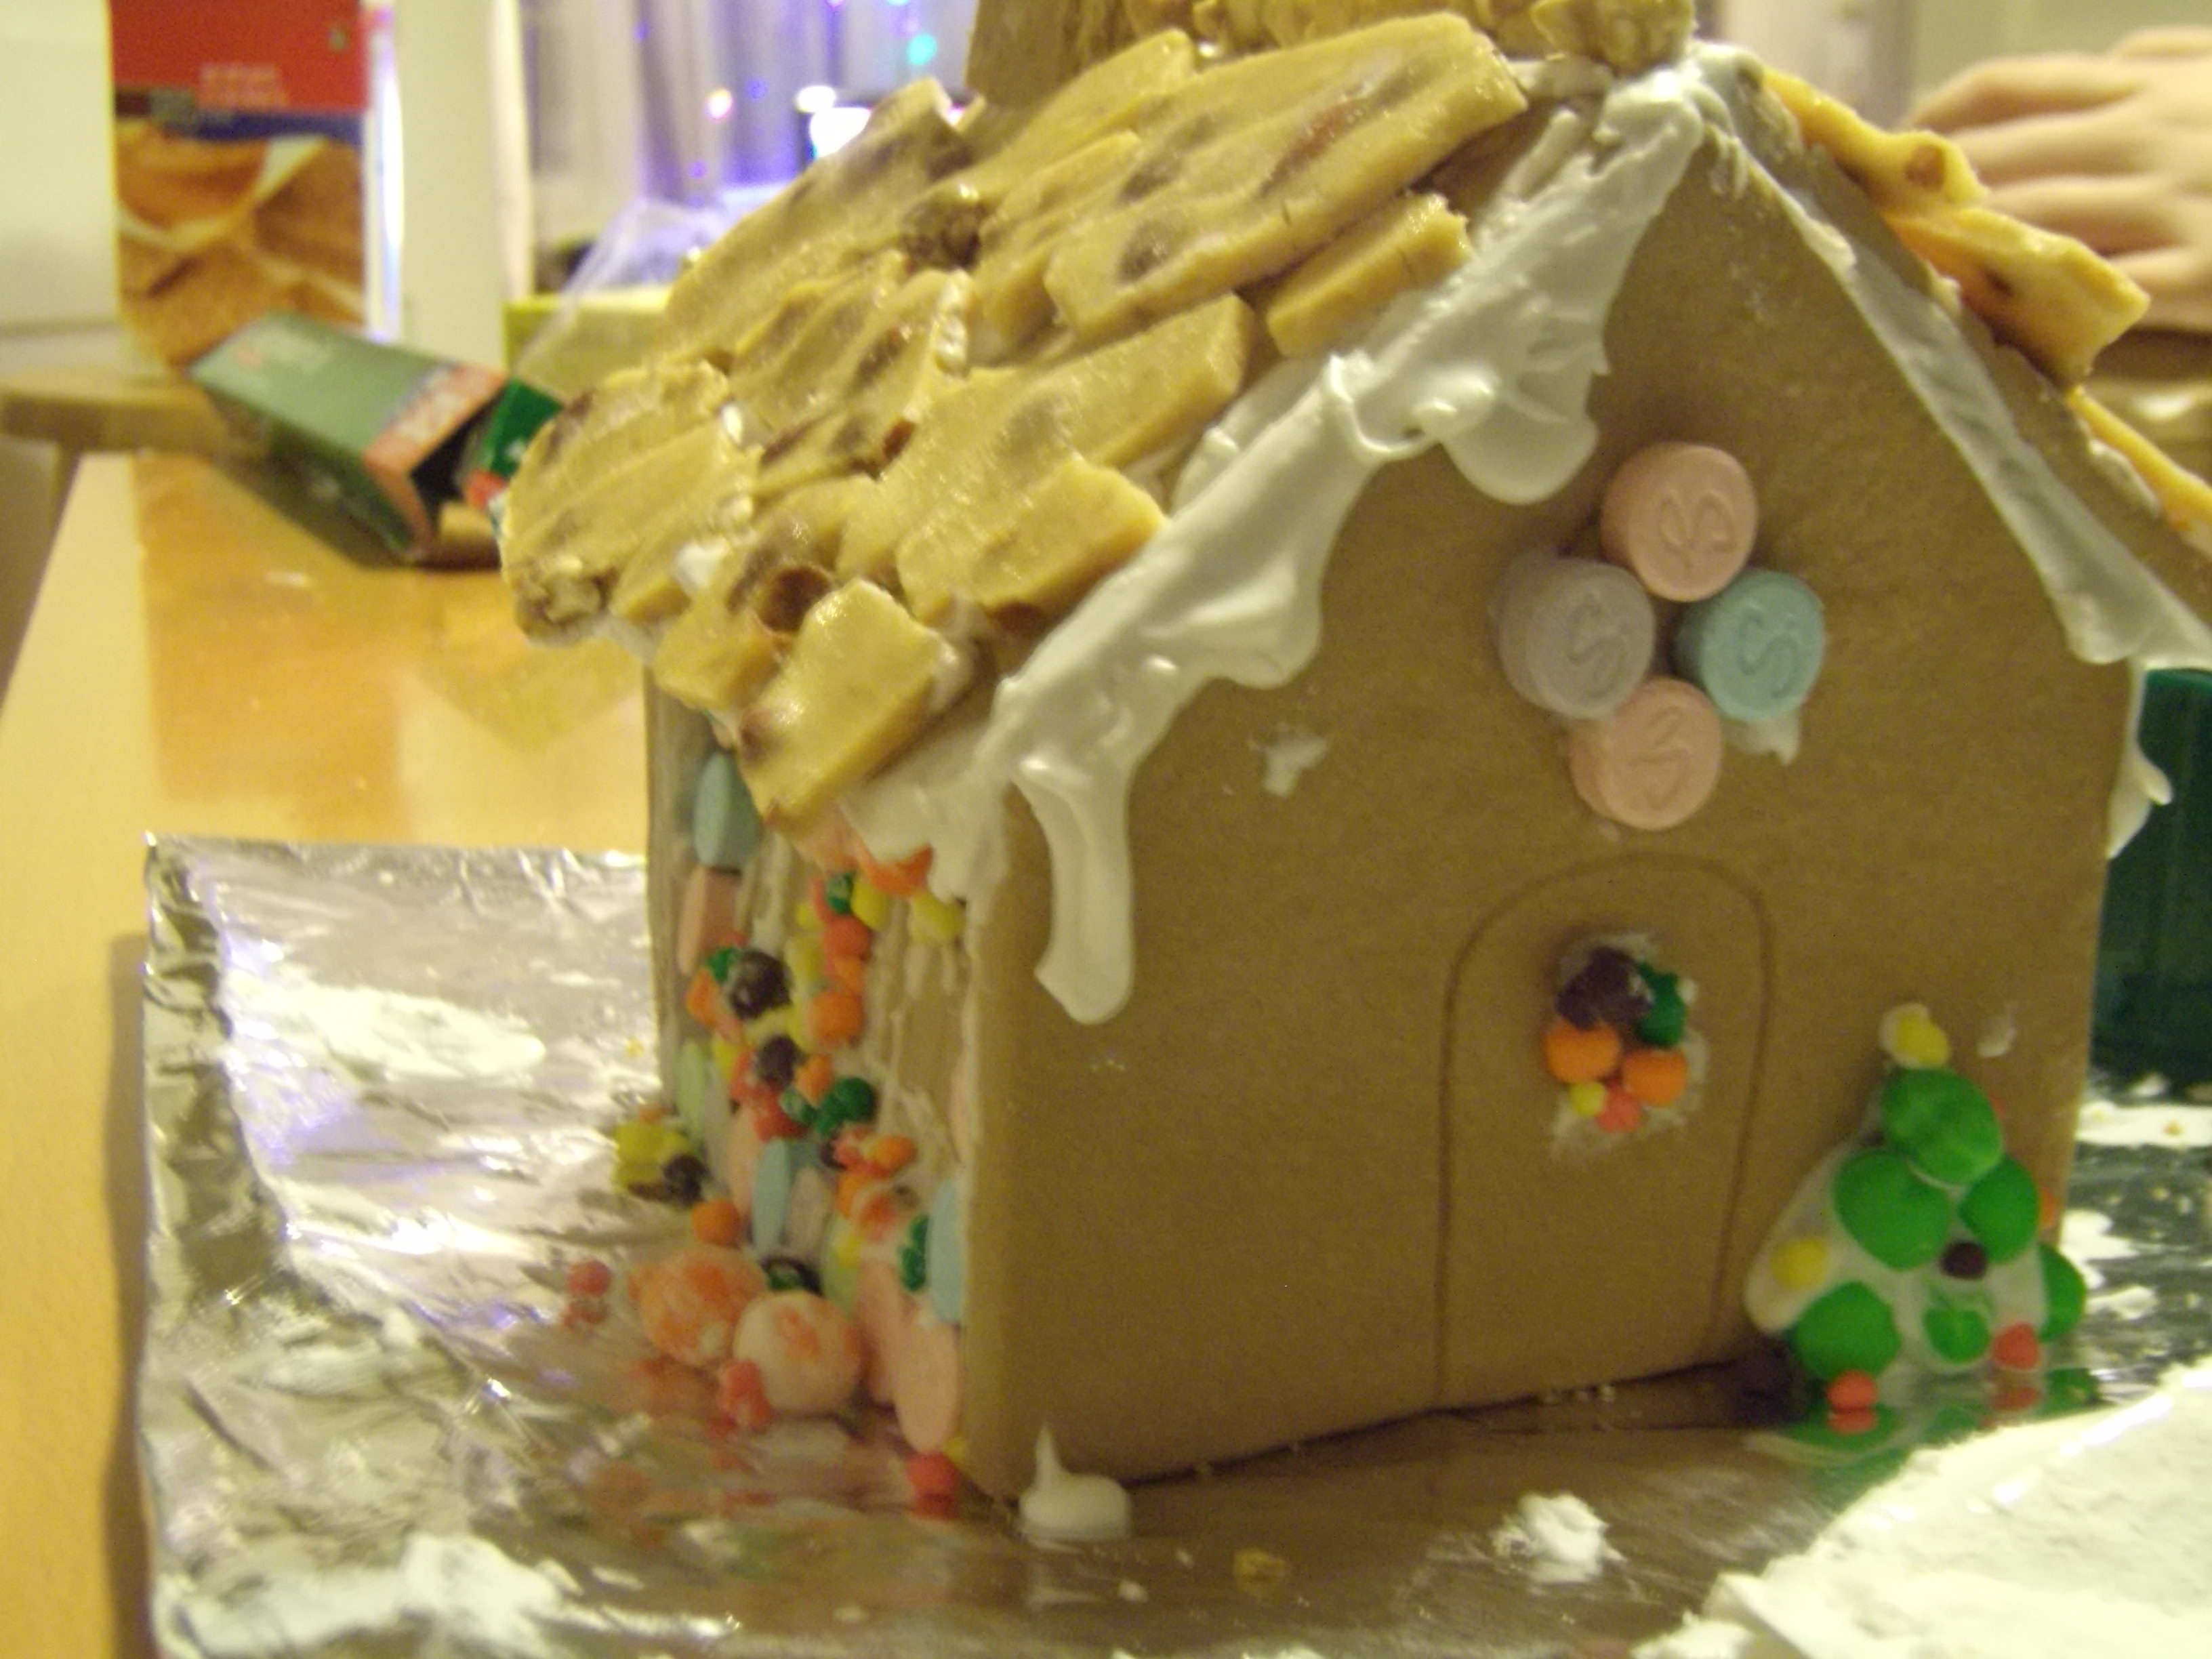 More gingerbread houses